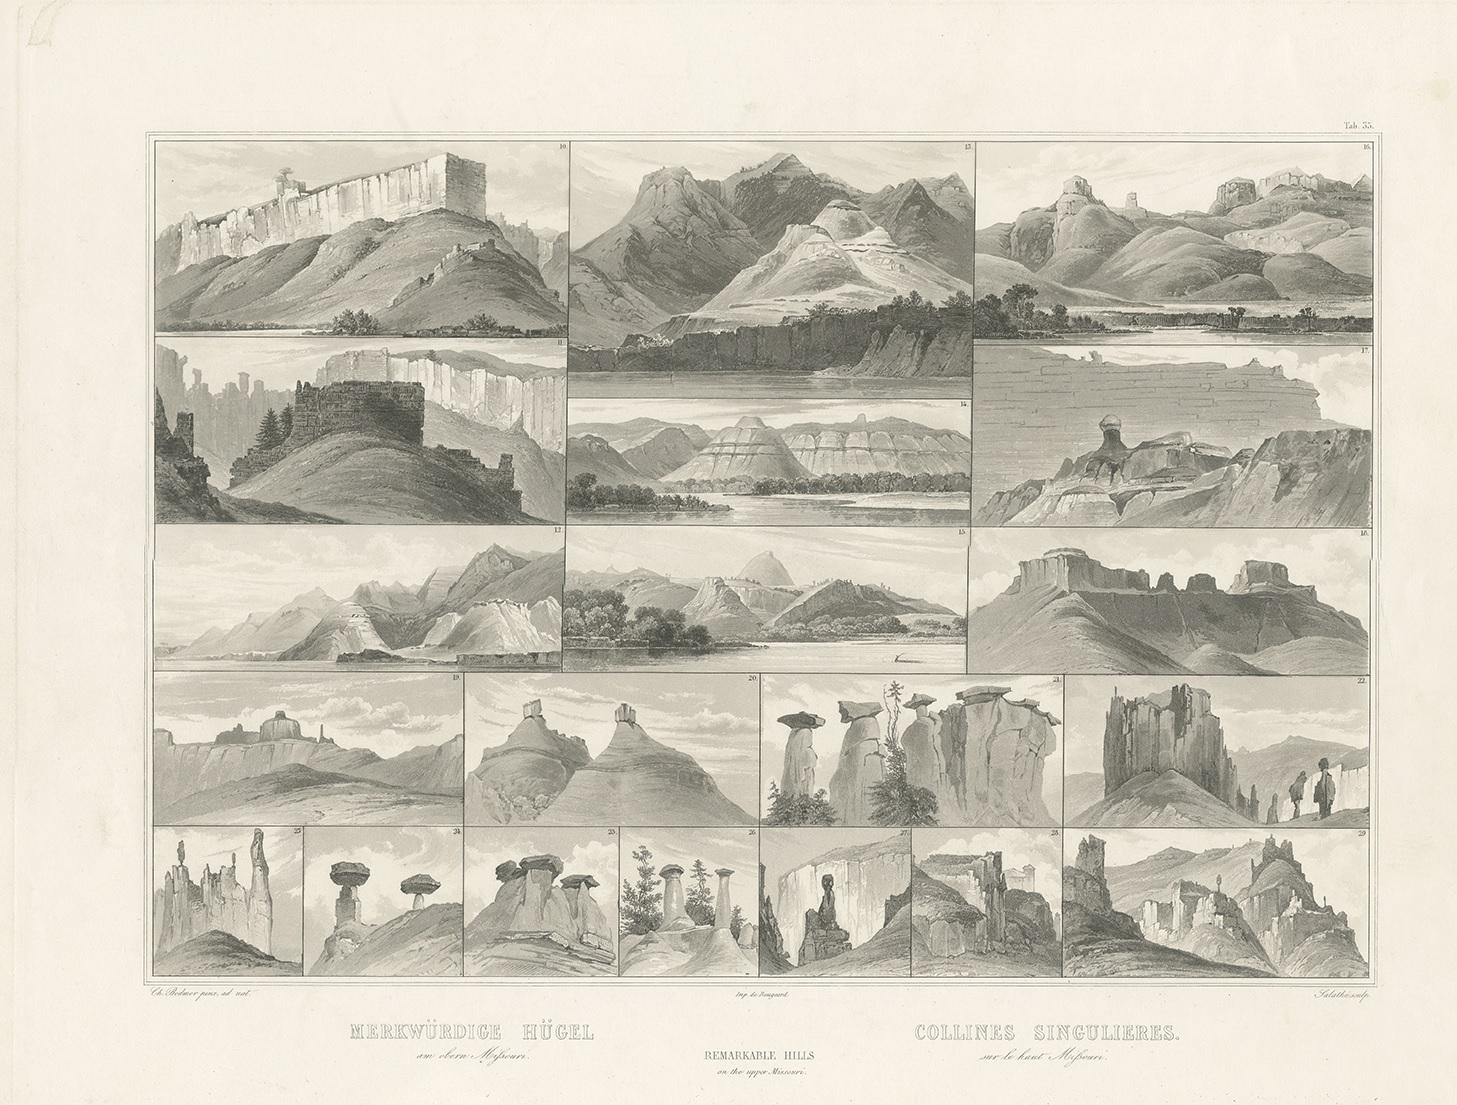 Antique print titled 'Merkwürdige Hügel - Collines Singulieres'. Aquatint engraving by Salathé after Bodmer. A composite plate made up from twenty separate views, but with plain borders between each image. Numbered in the plate, they were all